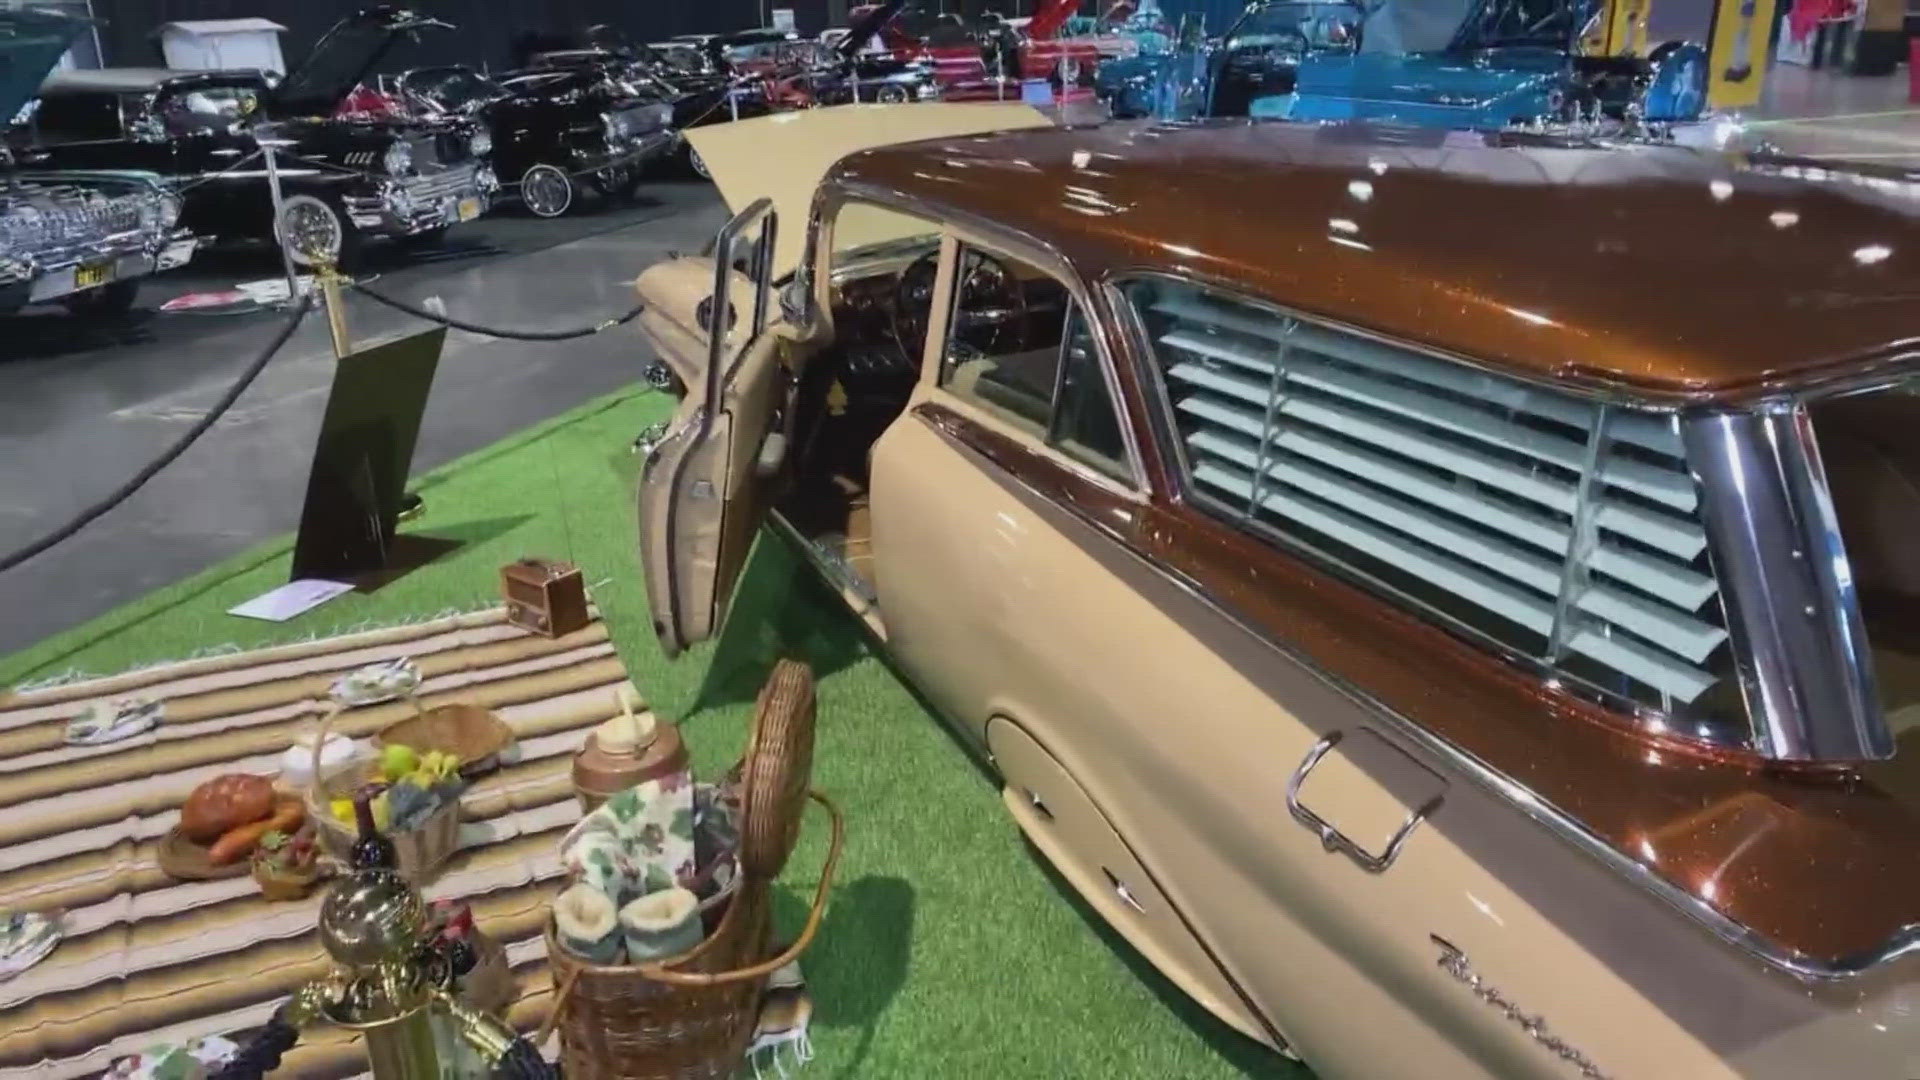 The Sacramento Autorama is in its 73rd year. More than 500 show vehicles will compete at Cal Expo.